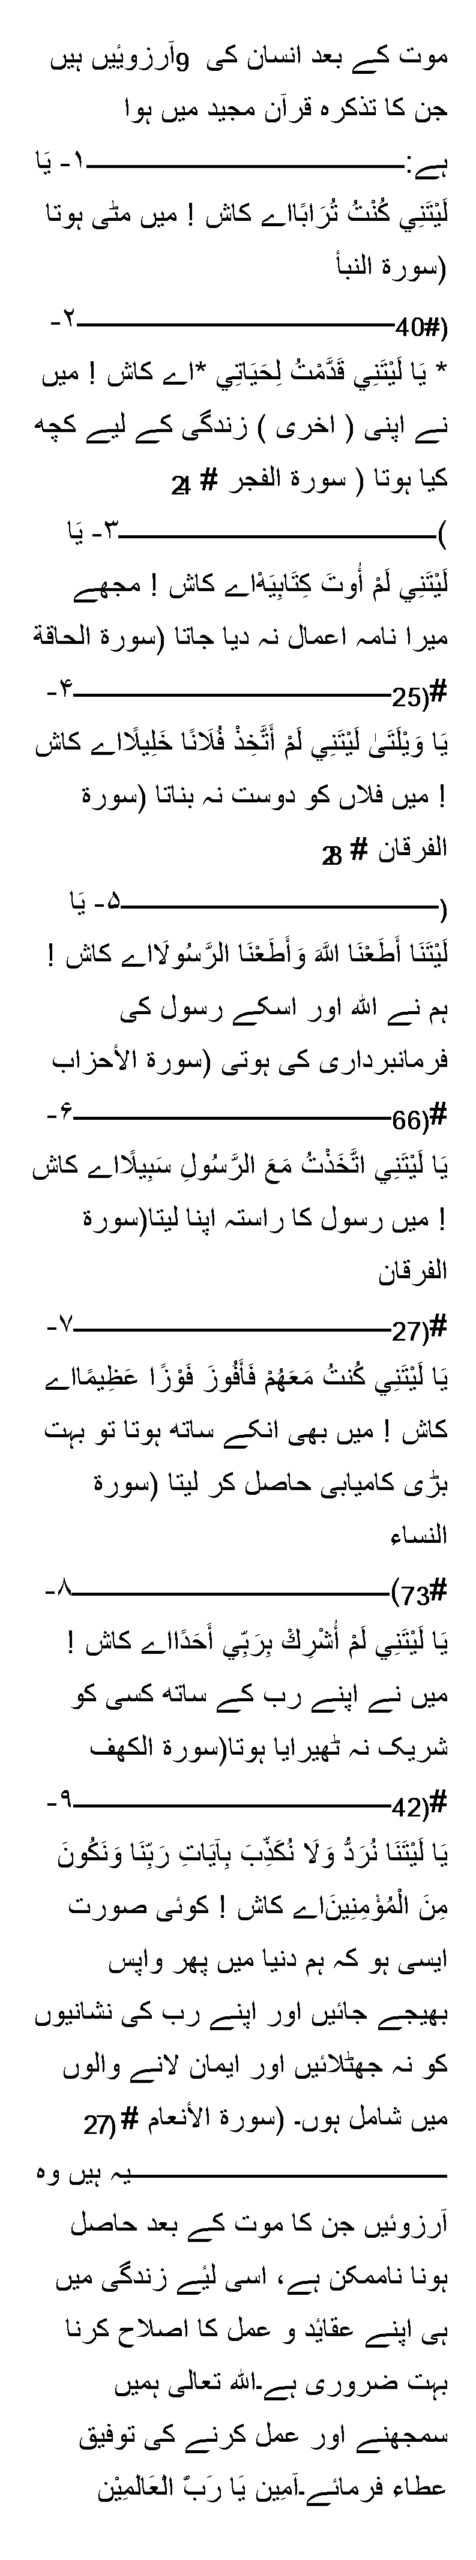 There are 9 wishes of man after death which are mentioned in the Holy Quran